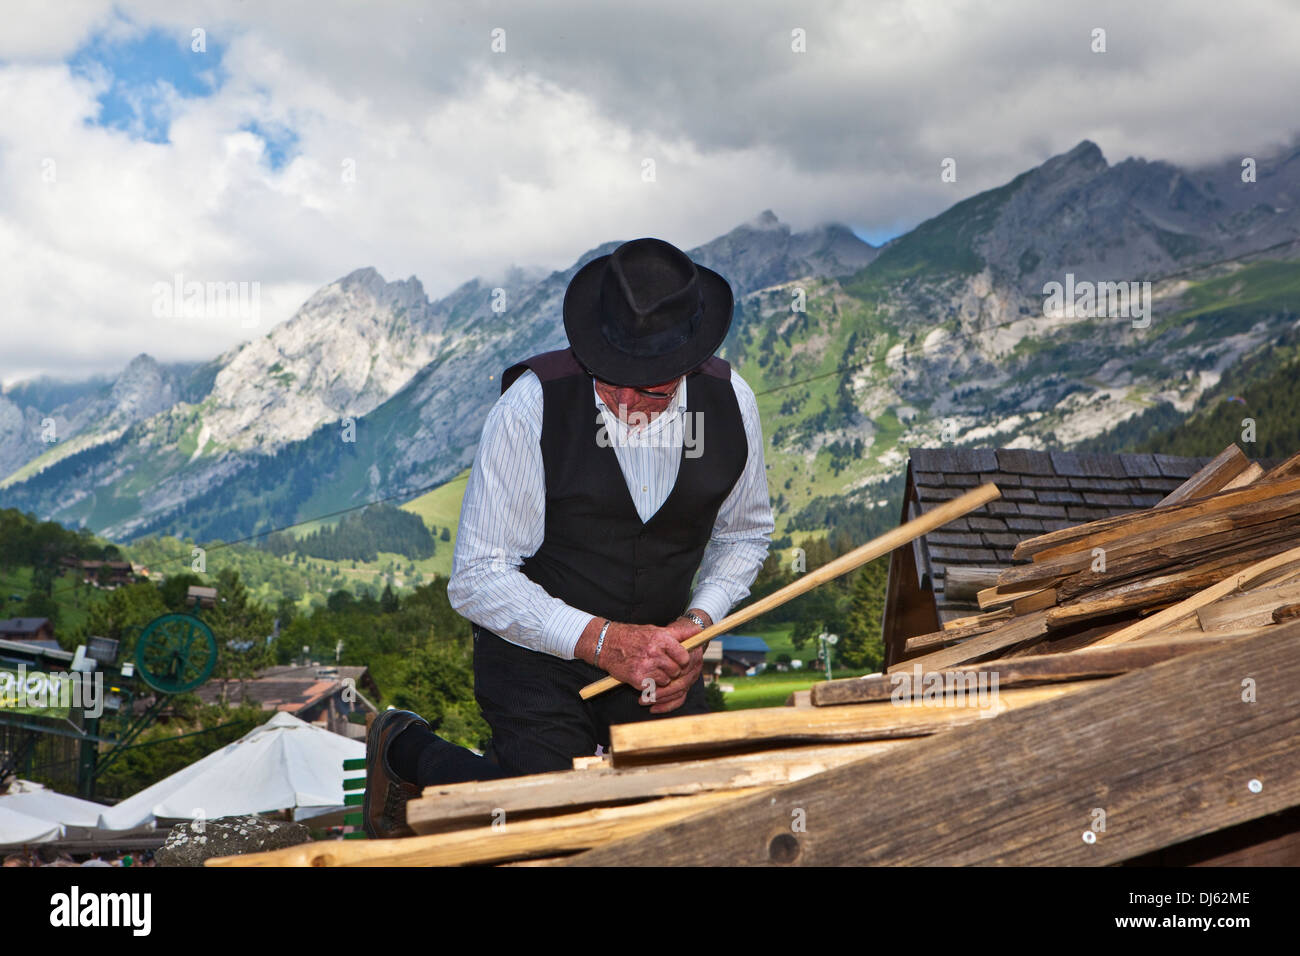 Man covering the roof of a chalet with shakes (shingles) Stock Photo